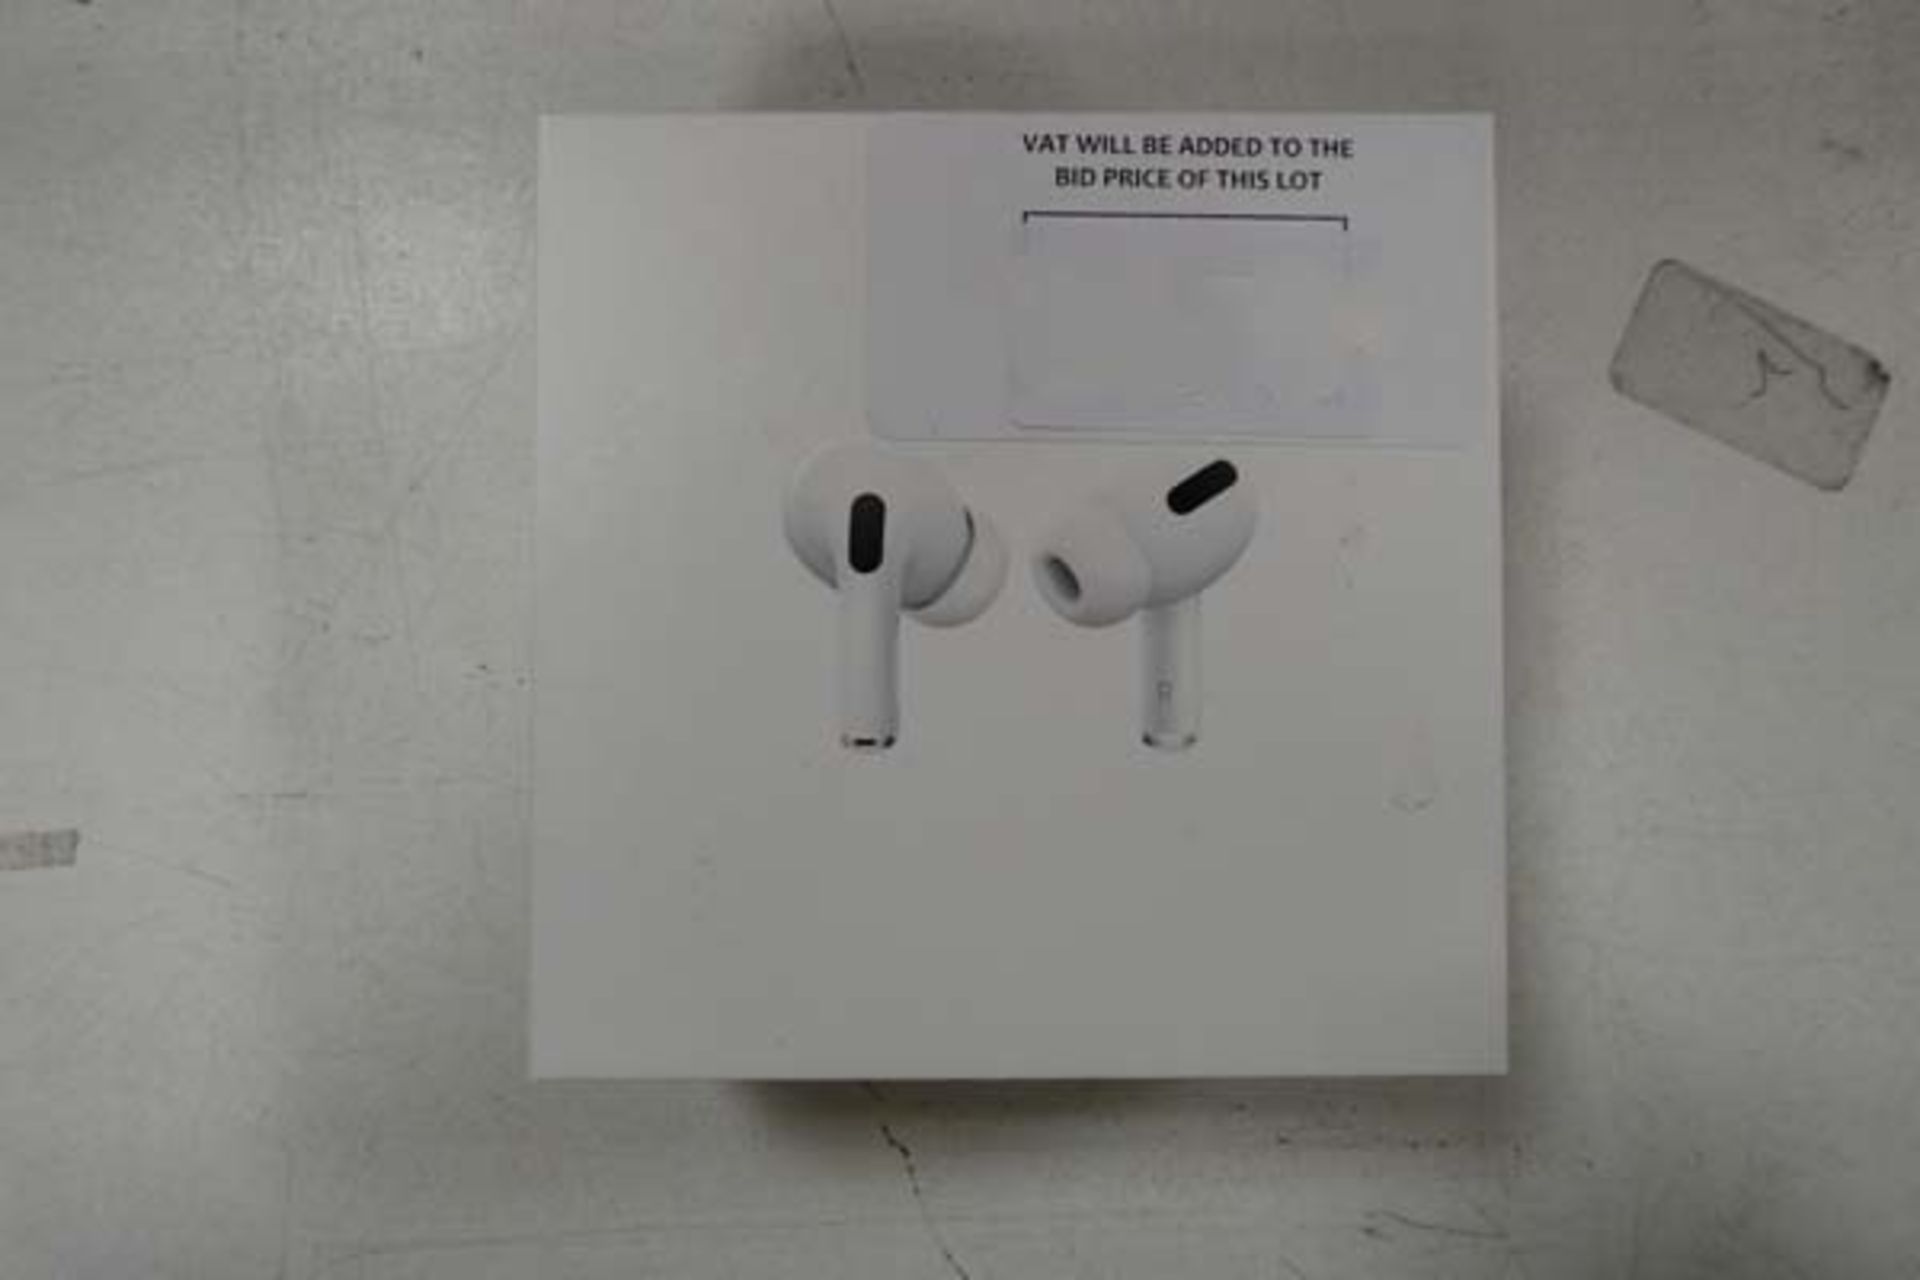 2020 Pair of purple Air pods pro with wireless charging case in box - Image 2 of 2